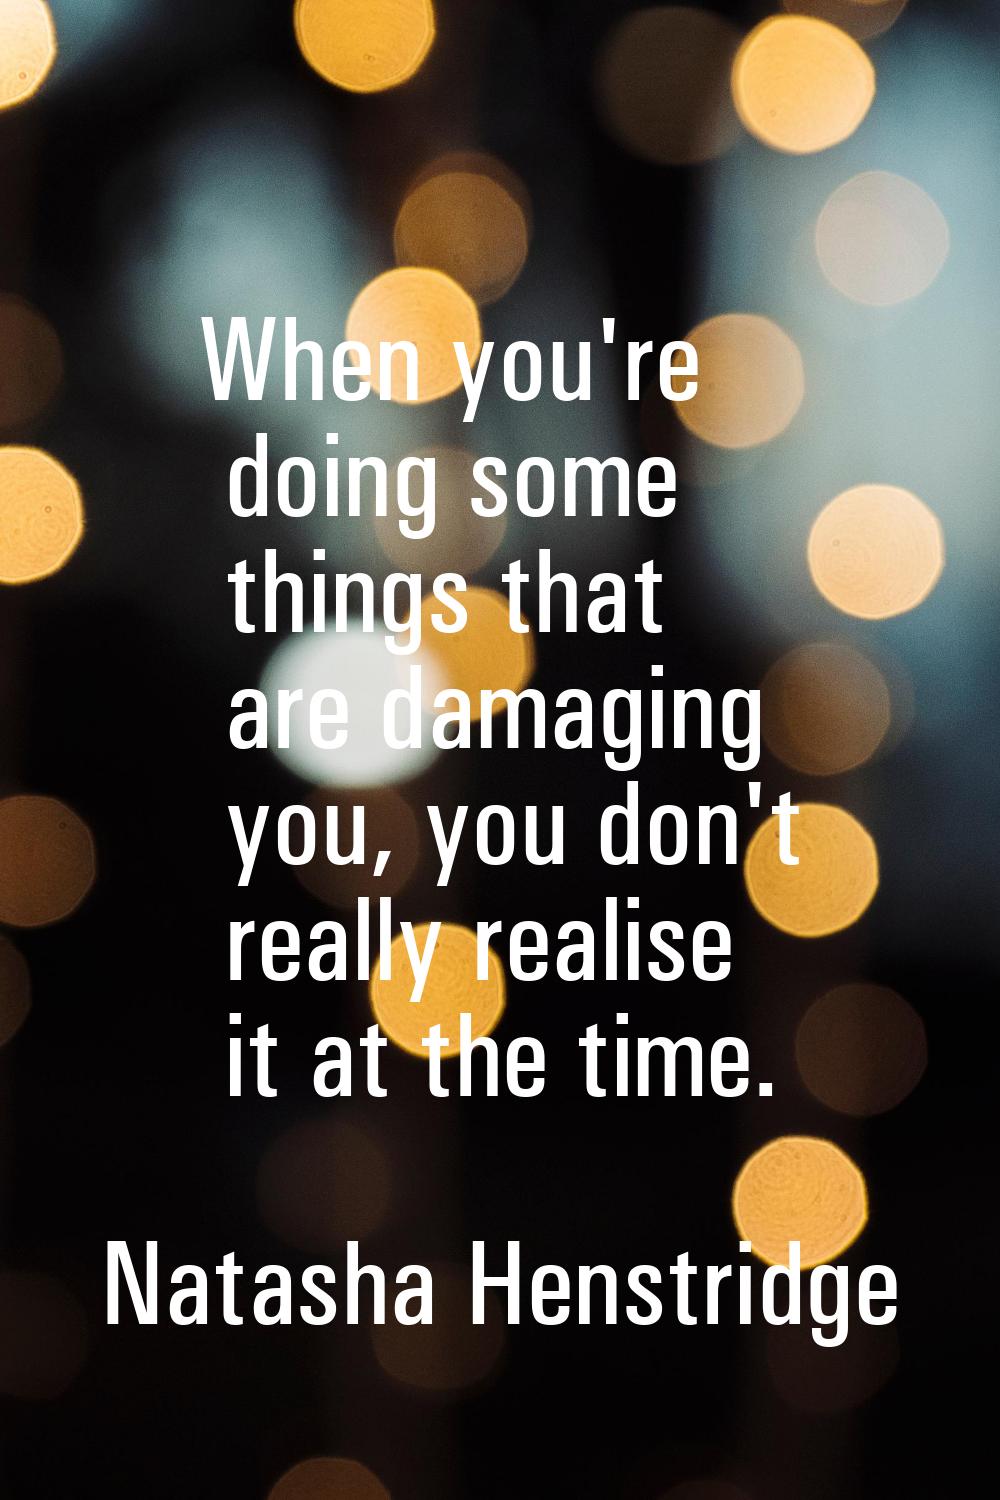 When you're doing some things that are damaging you, you don't really realise it at the time.